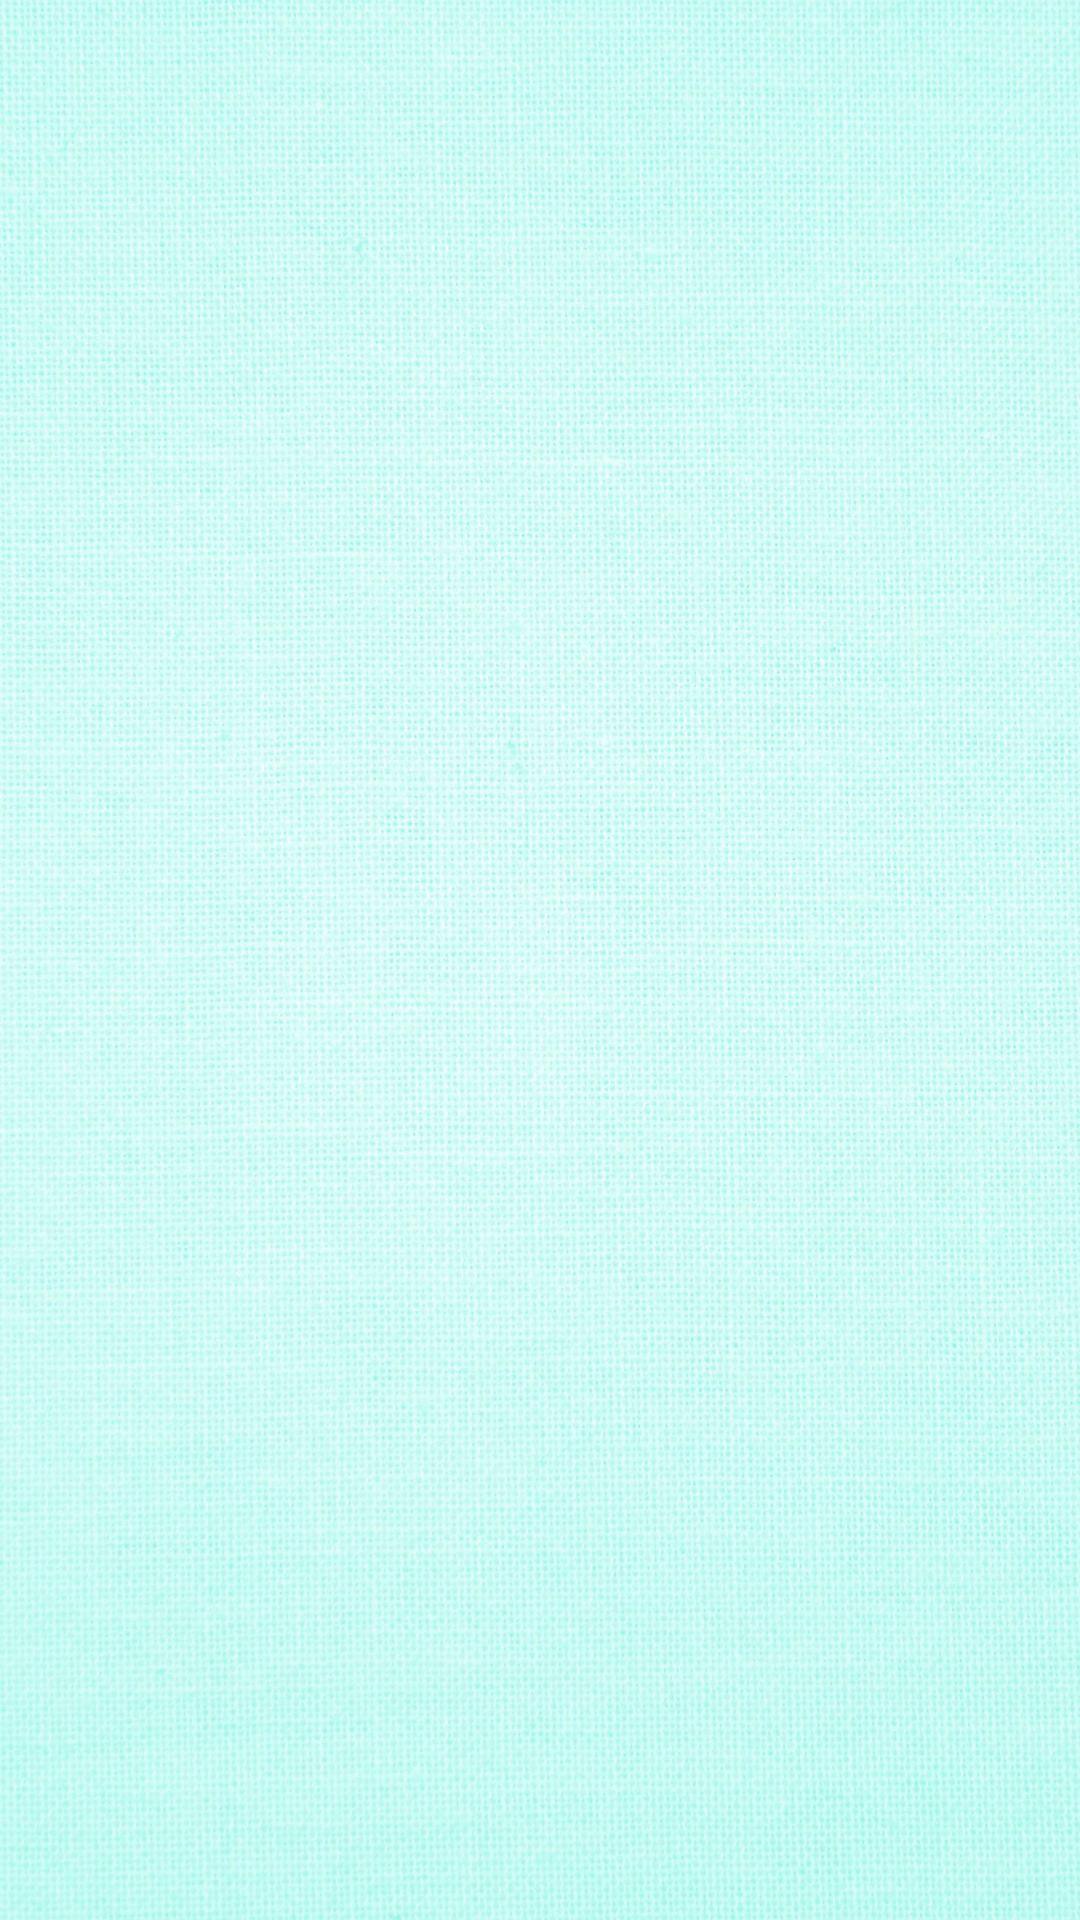 Plain Pastel Background Images HD Pictures and Wallpaper For Free Download   Pngtree